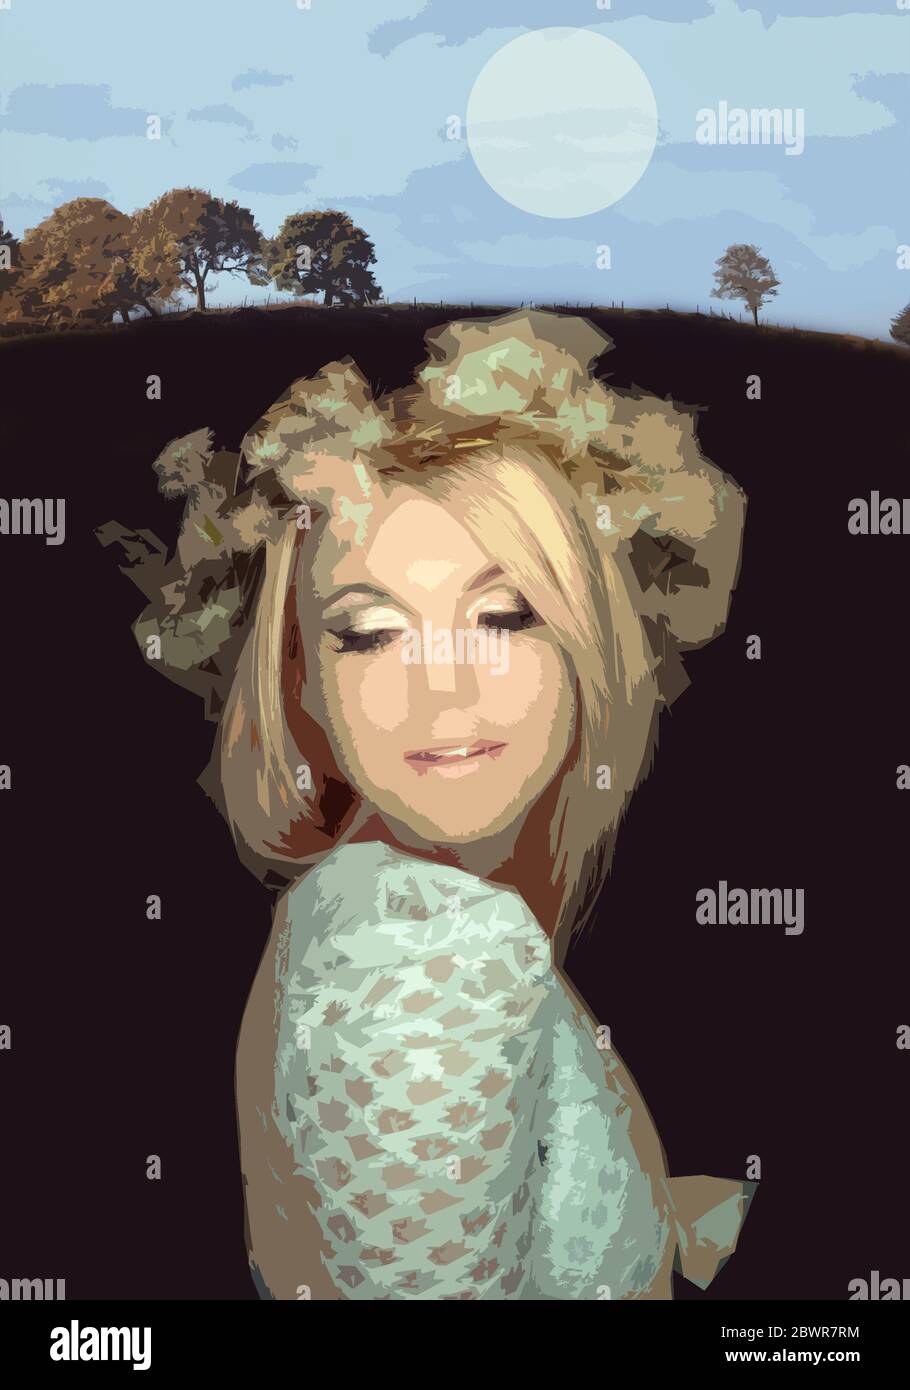 illustration of the woman wearing flower wreath Stock Photo